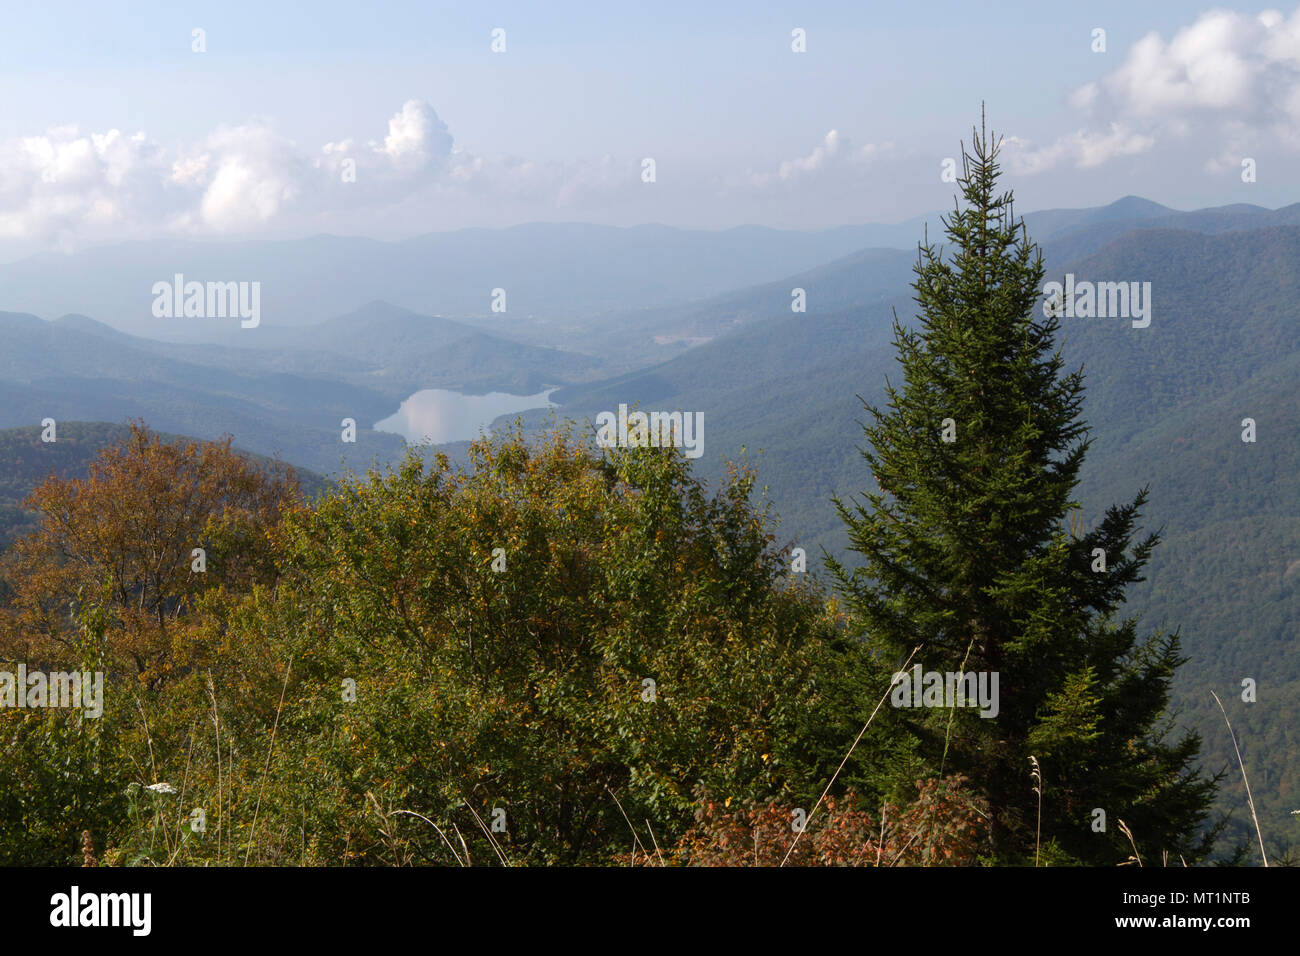 Appalachian Mountain wilderness high elevation view from Mount Mitchell State Park in North Carolina, the highest peak of the Appalachian Mountains an Stock Photo